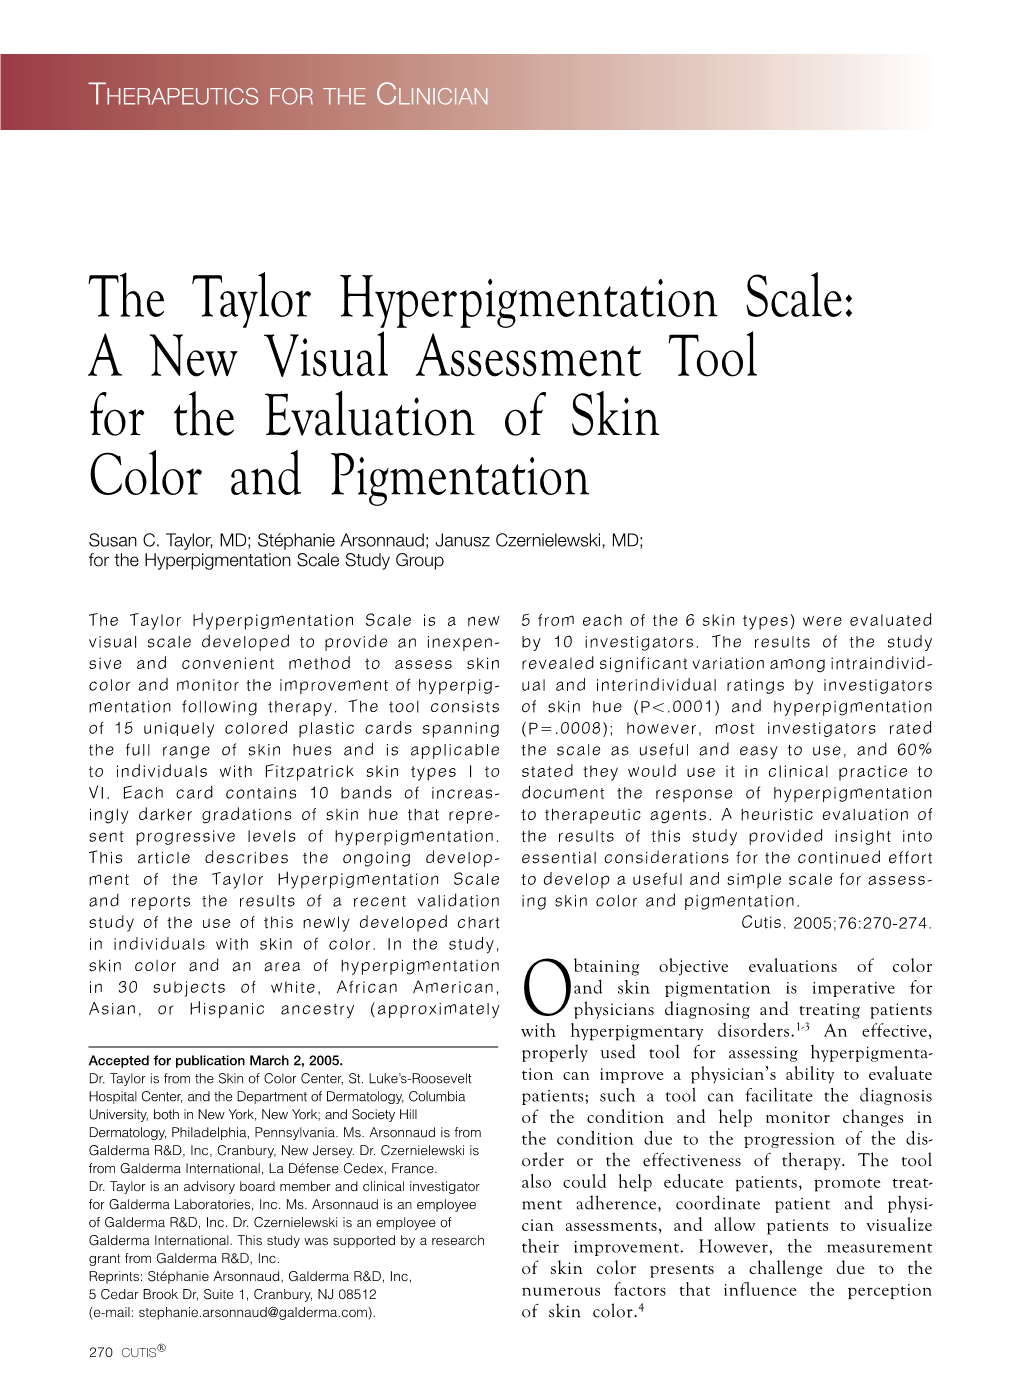 The Taylor Hyperpigmentation Scale: a New Visual Assessment Tool for the Evaluation of Skin Color and Pigmentation